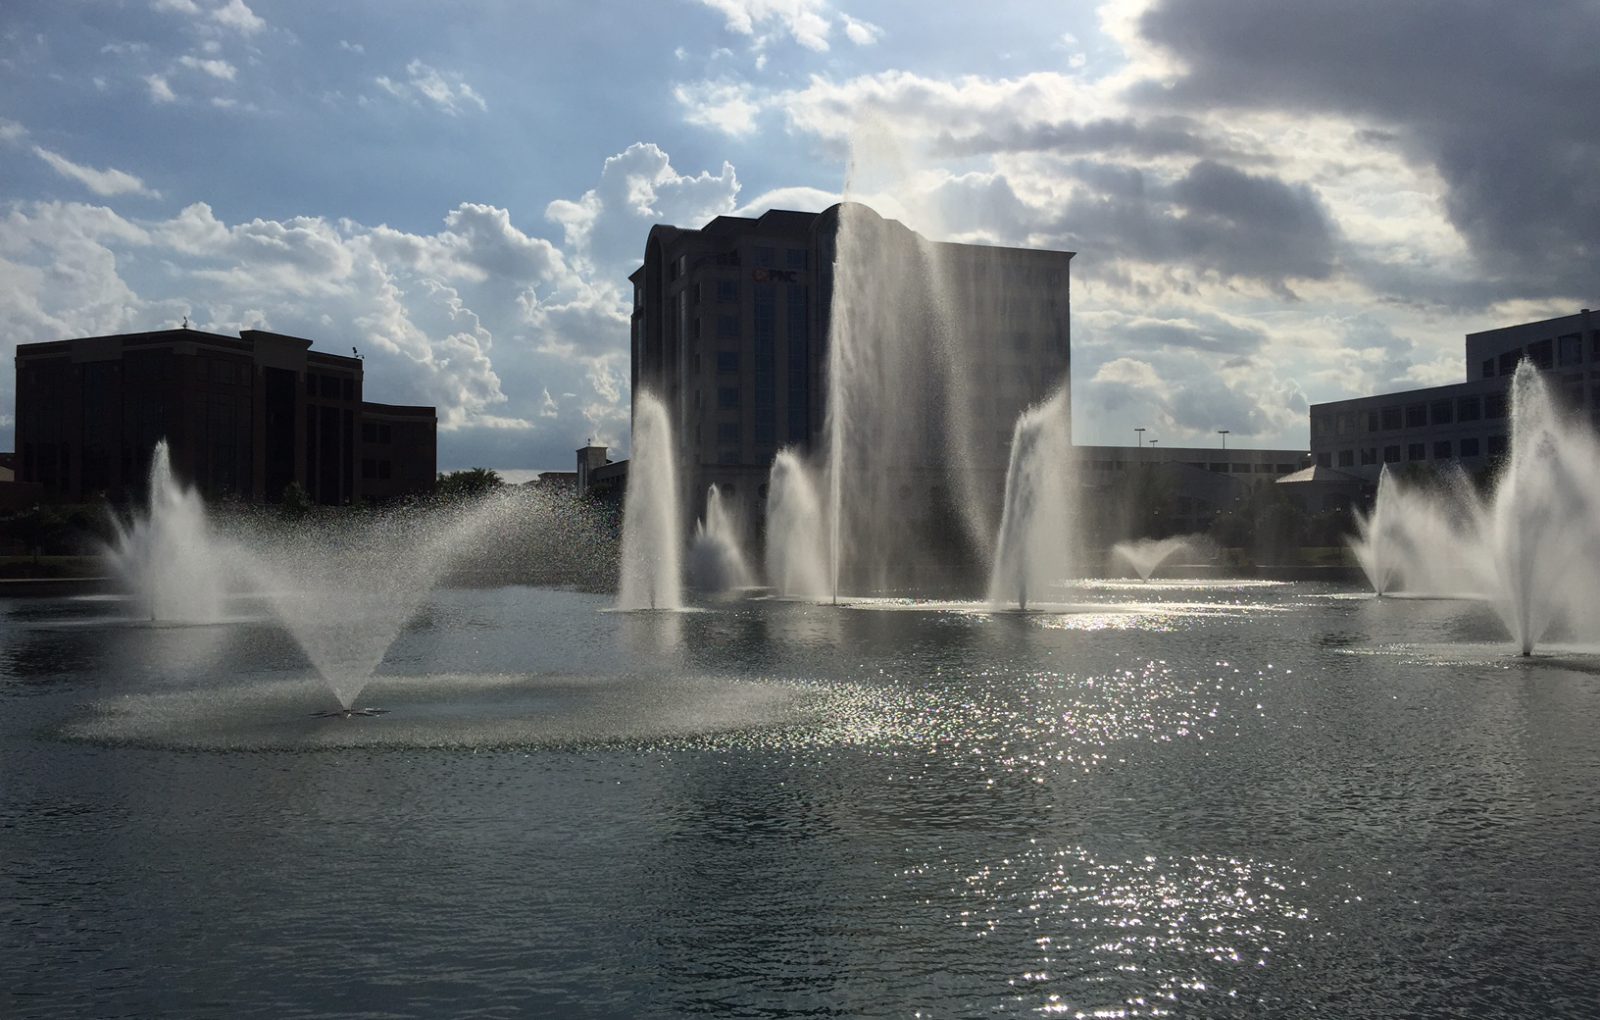 municipalities and city lake and pond management markets served - fountains and aeration scenic